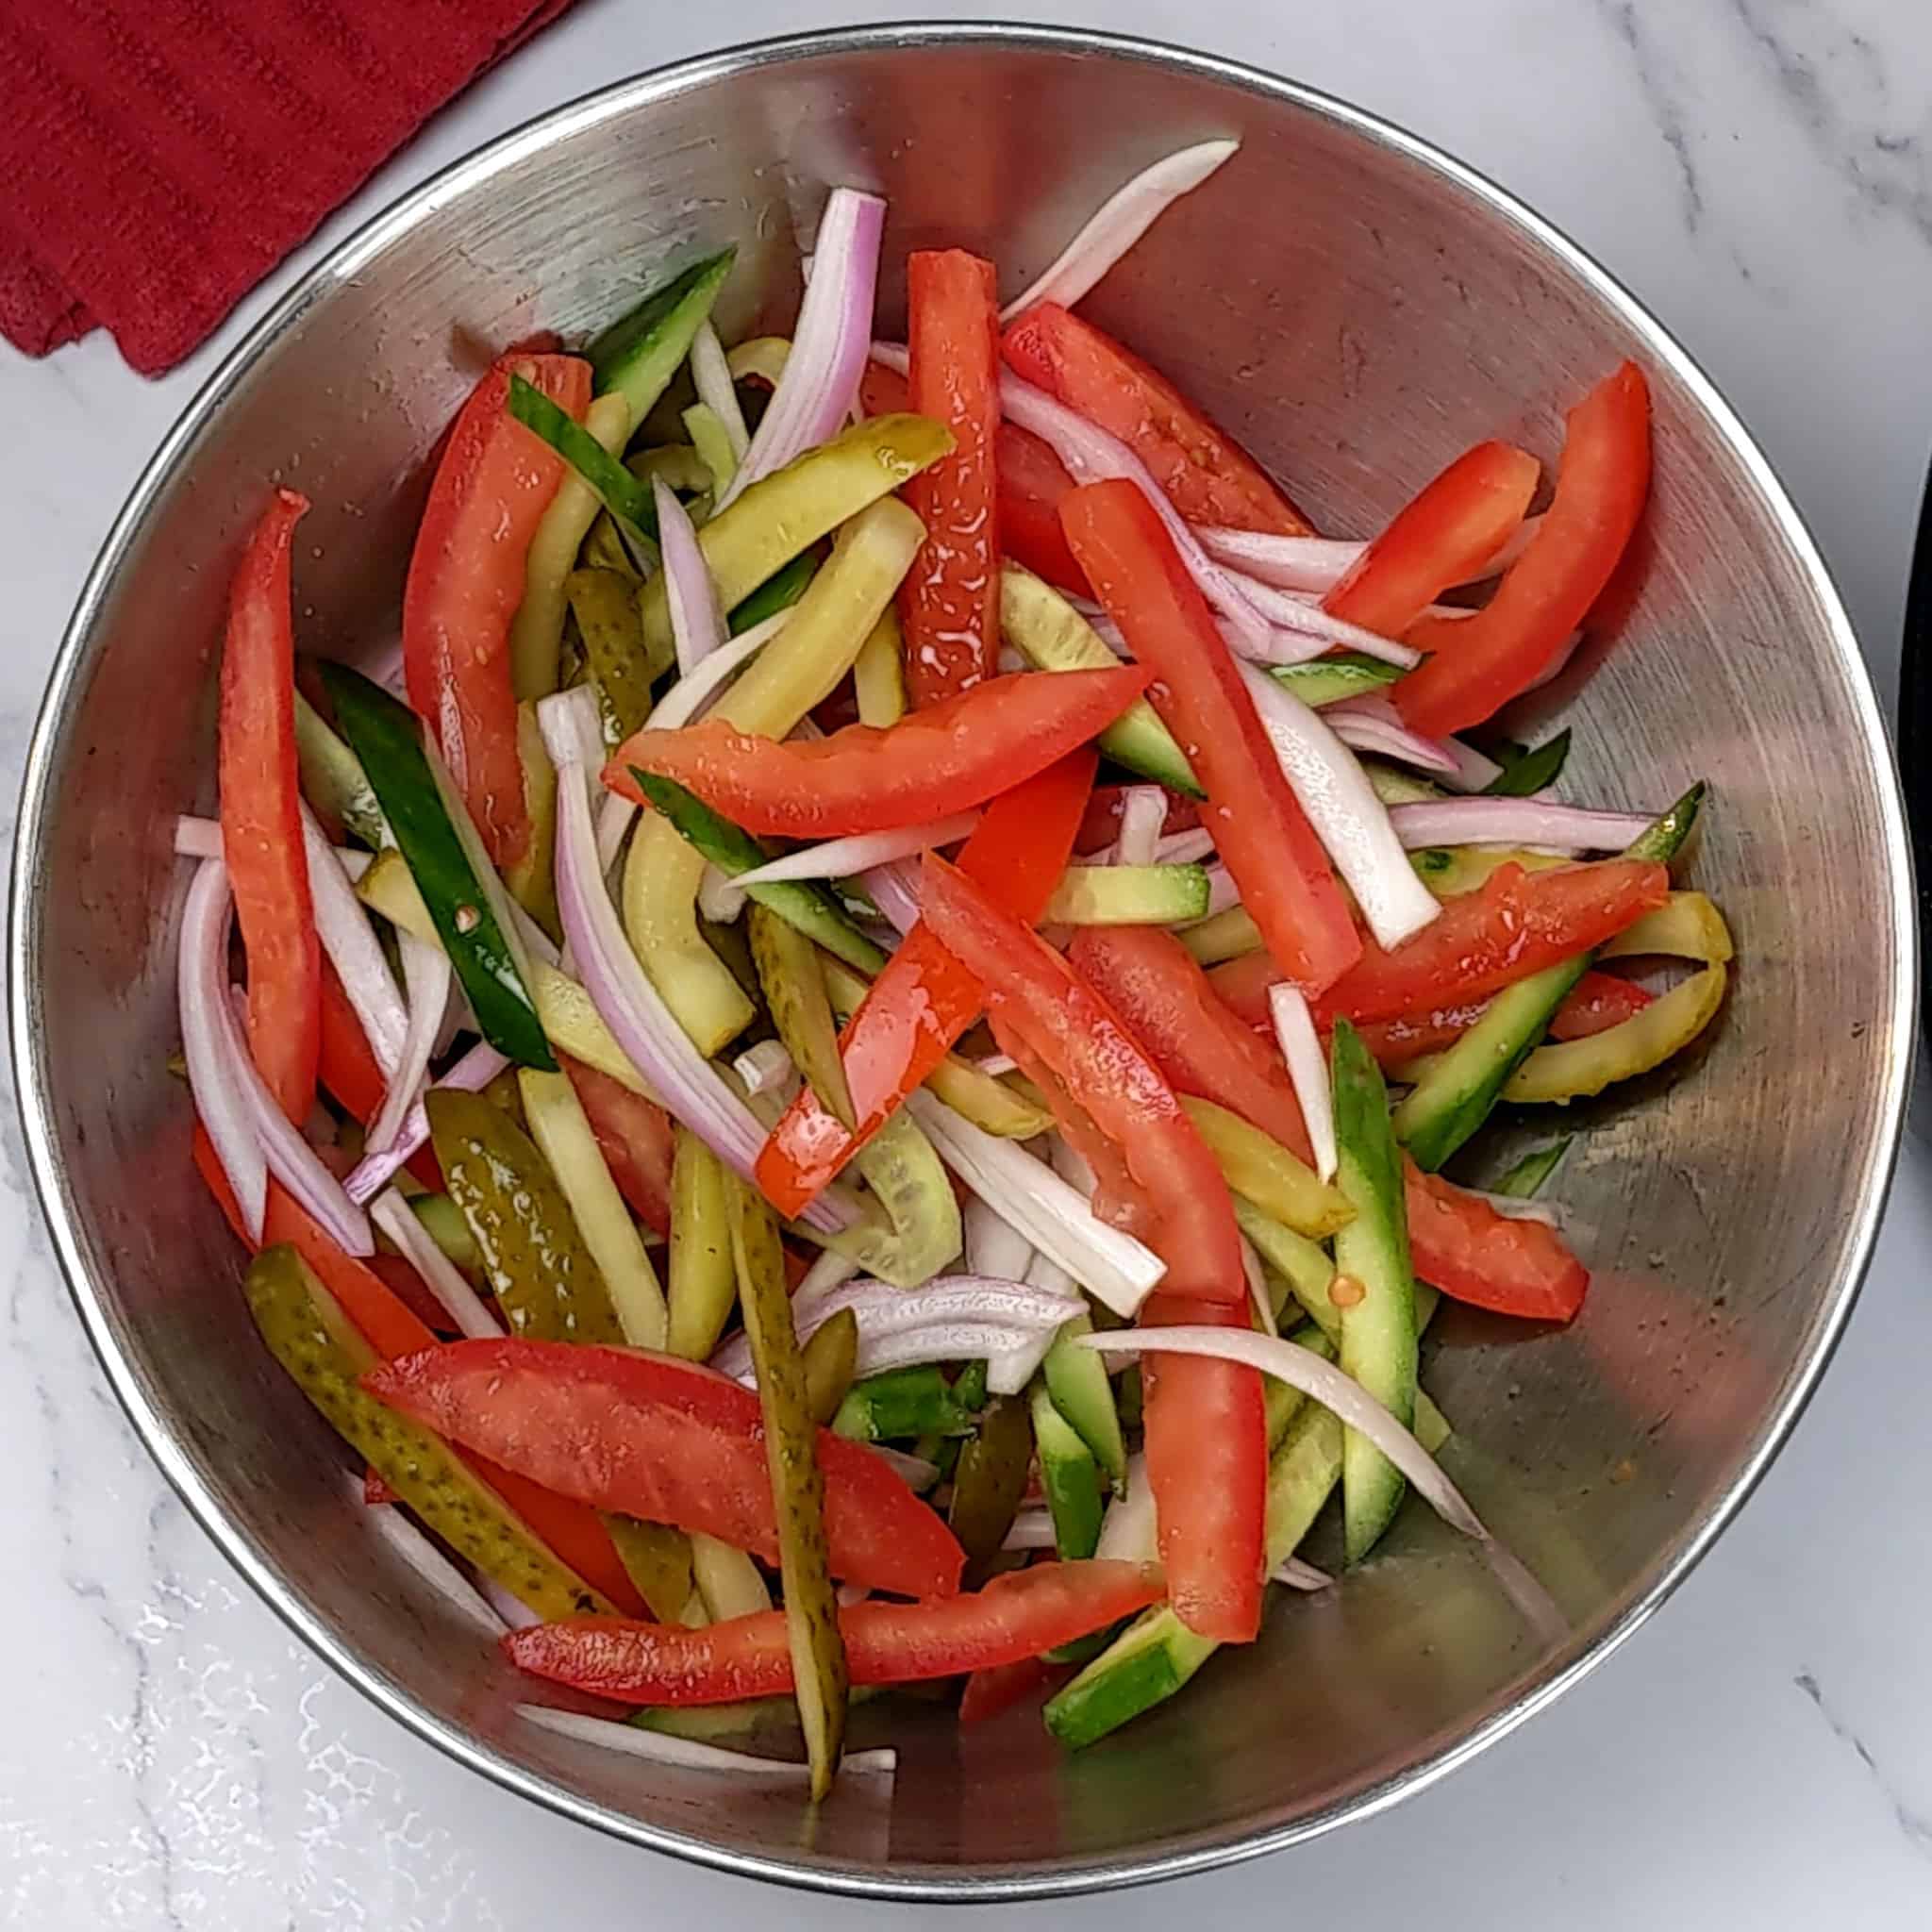 stainless steel mixing bowl with sliced strips of seeded roma tomatoes, pickles, shallots and cucumber.